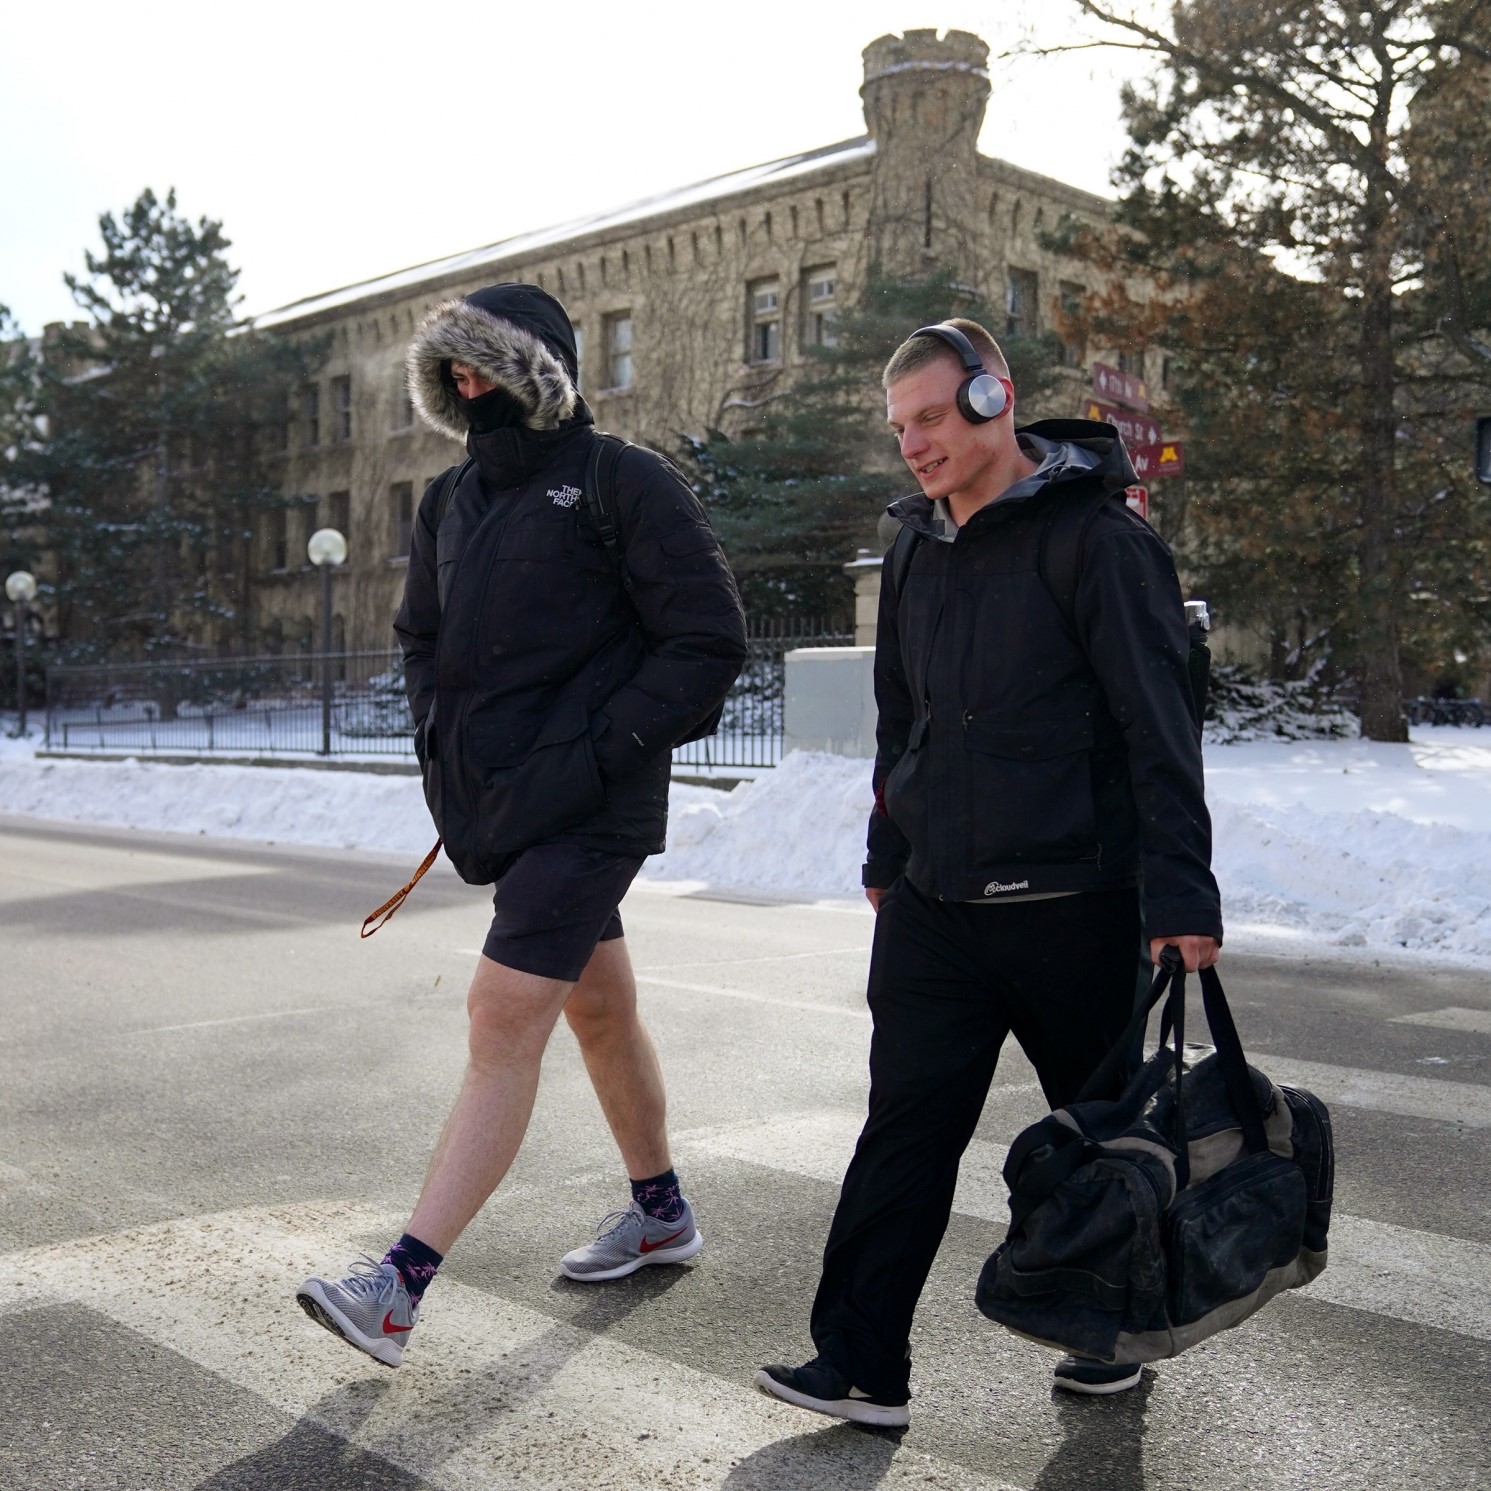 Minnesota man wears shorts during the state's deepest freeze in decades, which can lead to frostbite in minutes